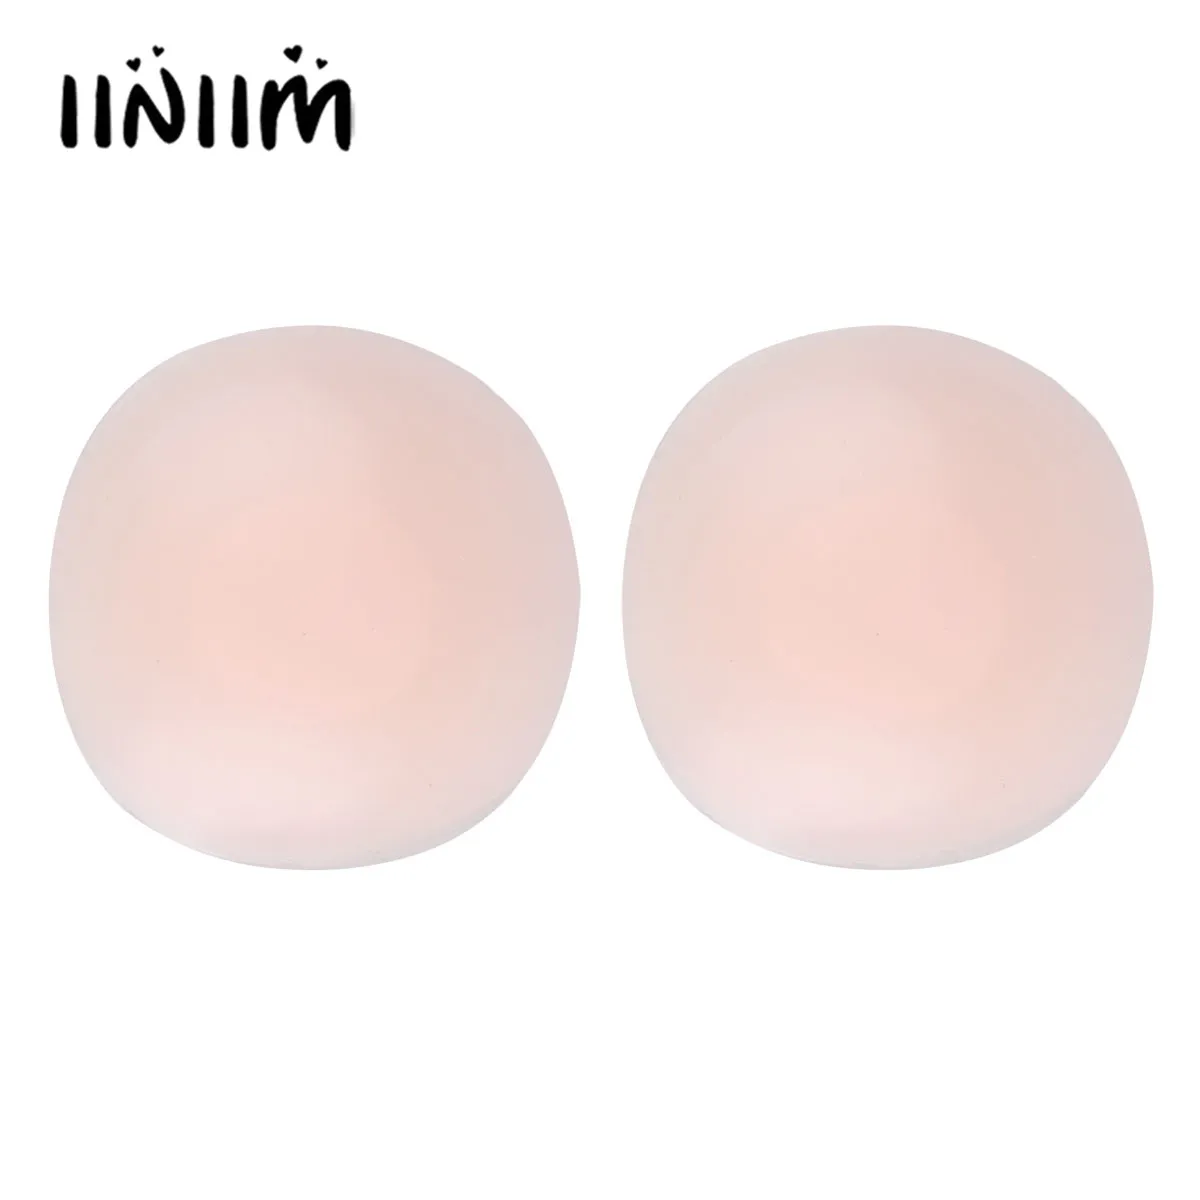 

1 Pair Womens Bra Nipplecovers Round Reusable Silicone Self-adhesive Invisible Nipple Cover Thin Pasties Concealers Breast Pads